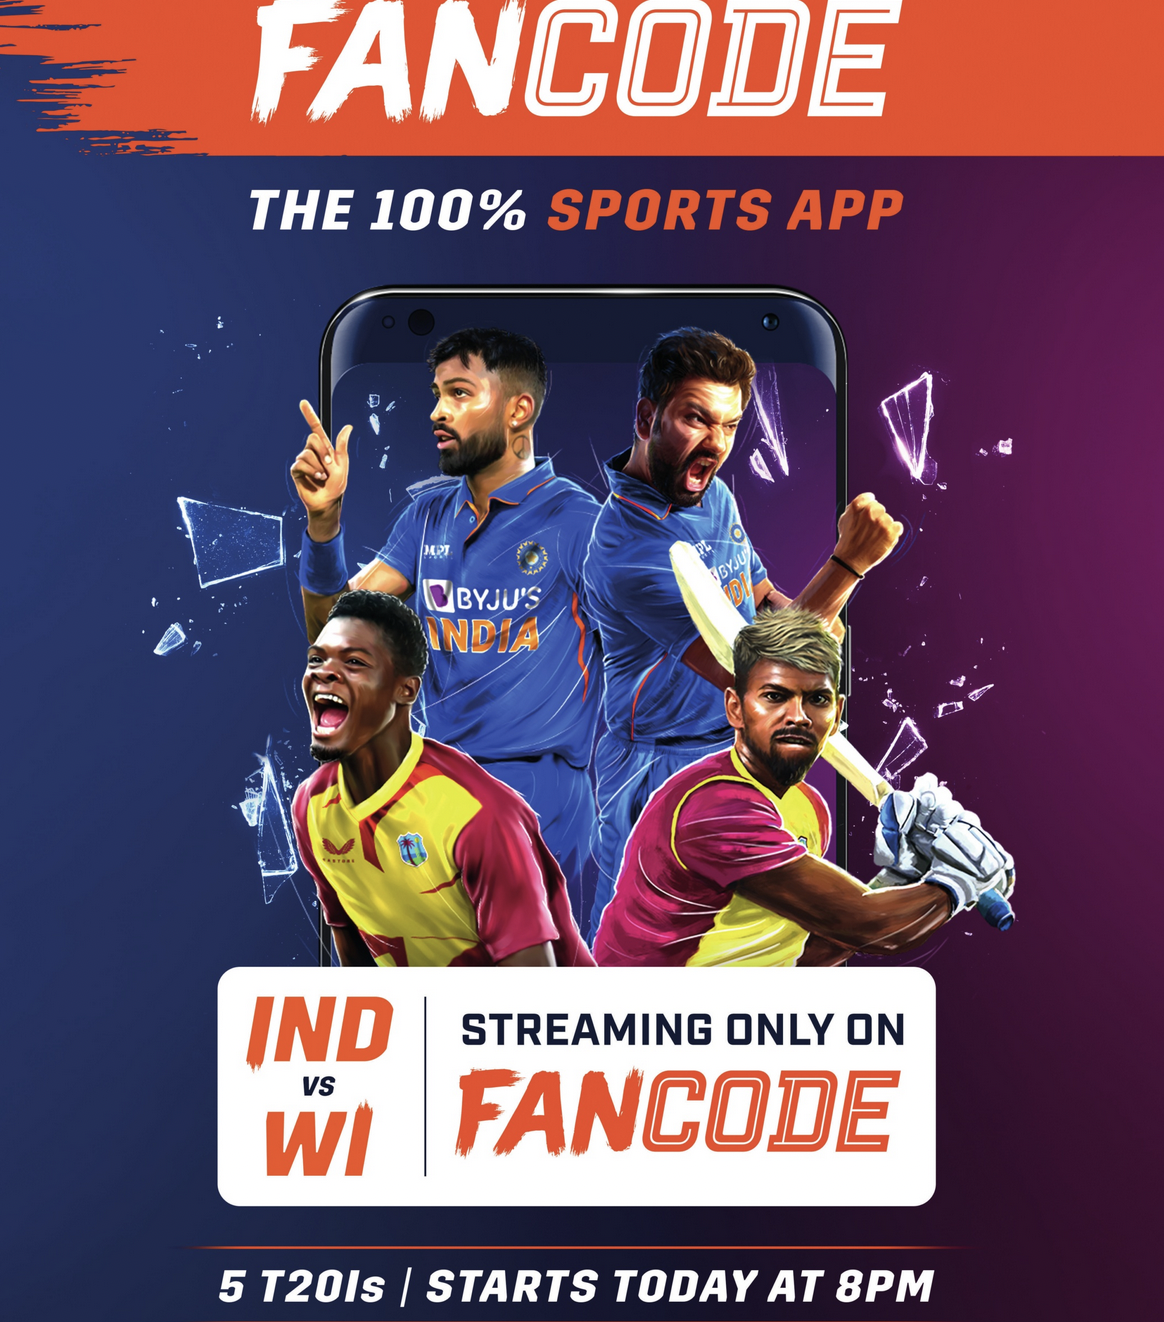 IND WI T20 Series LIVE Streaming FanCode gets Mobil, Cashify, Naukri on board as sponsors, Follow 1st T20 LIVE at 8PM